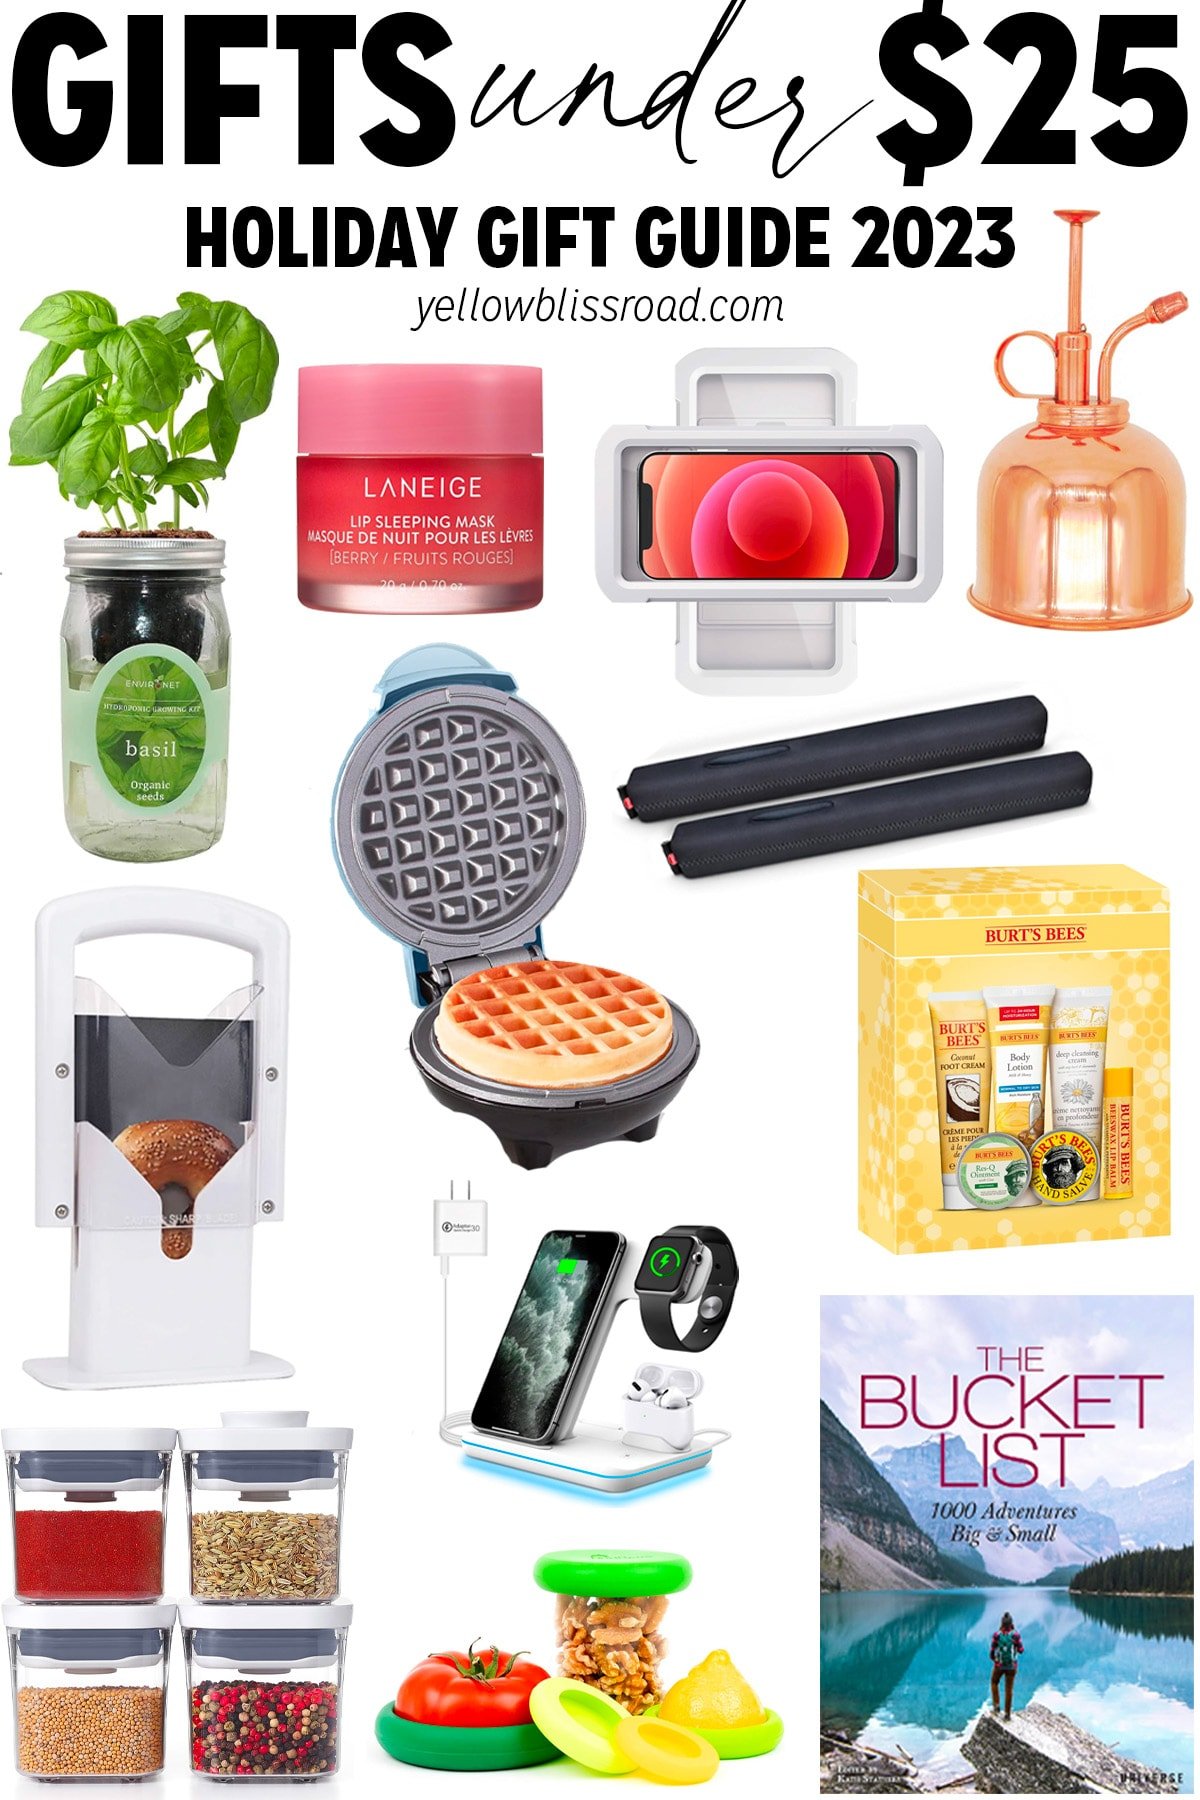 25 Kitchen Gift Ideas for 2023